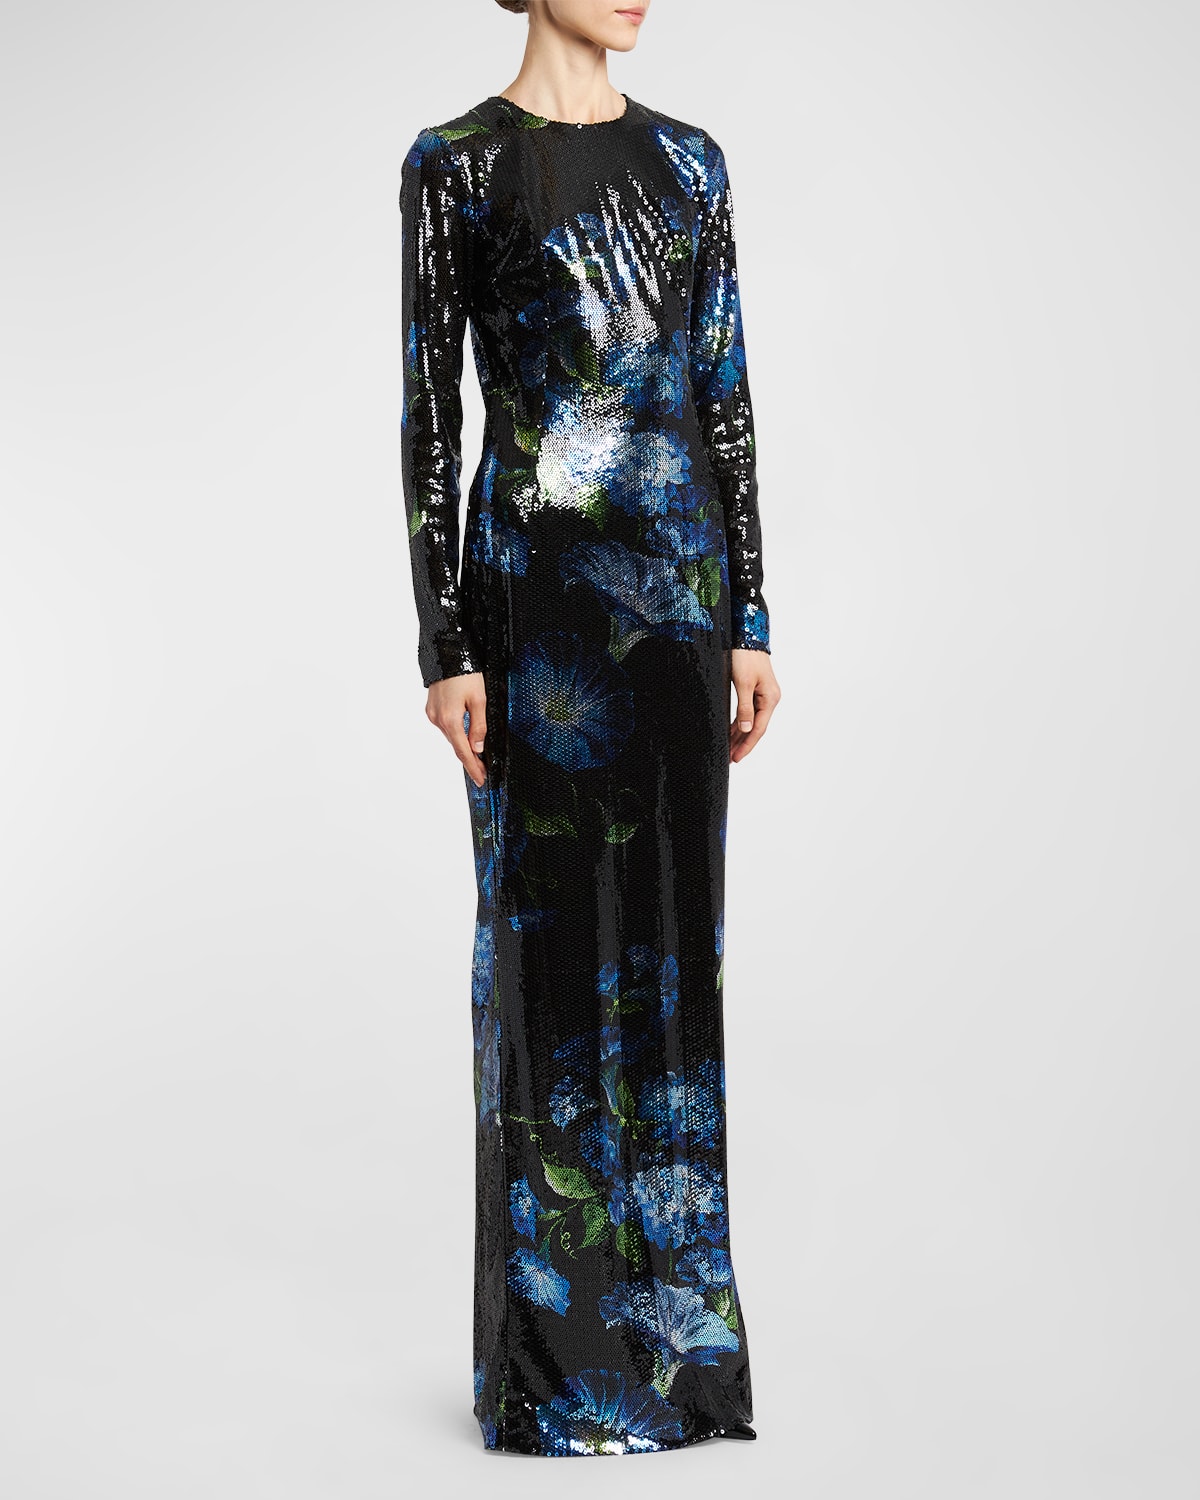 Bluebell Floral Print Paillette Embellished Gown